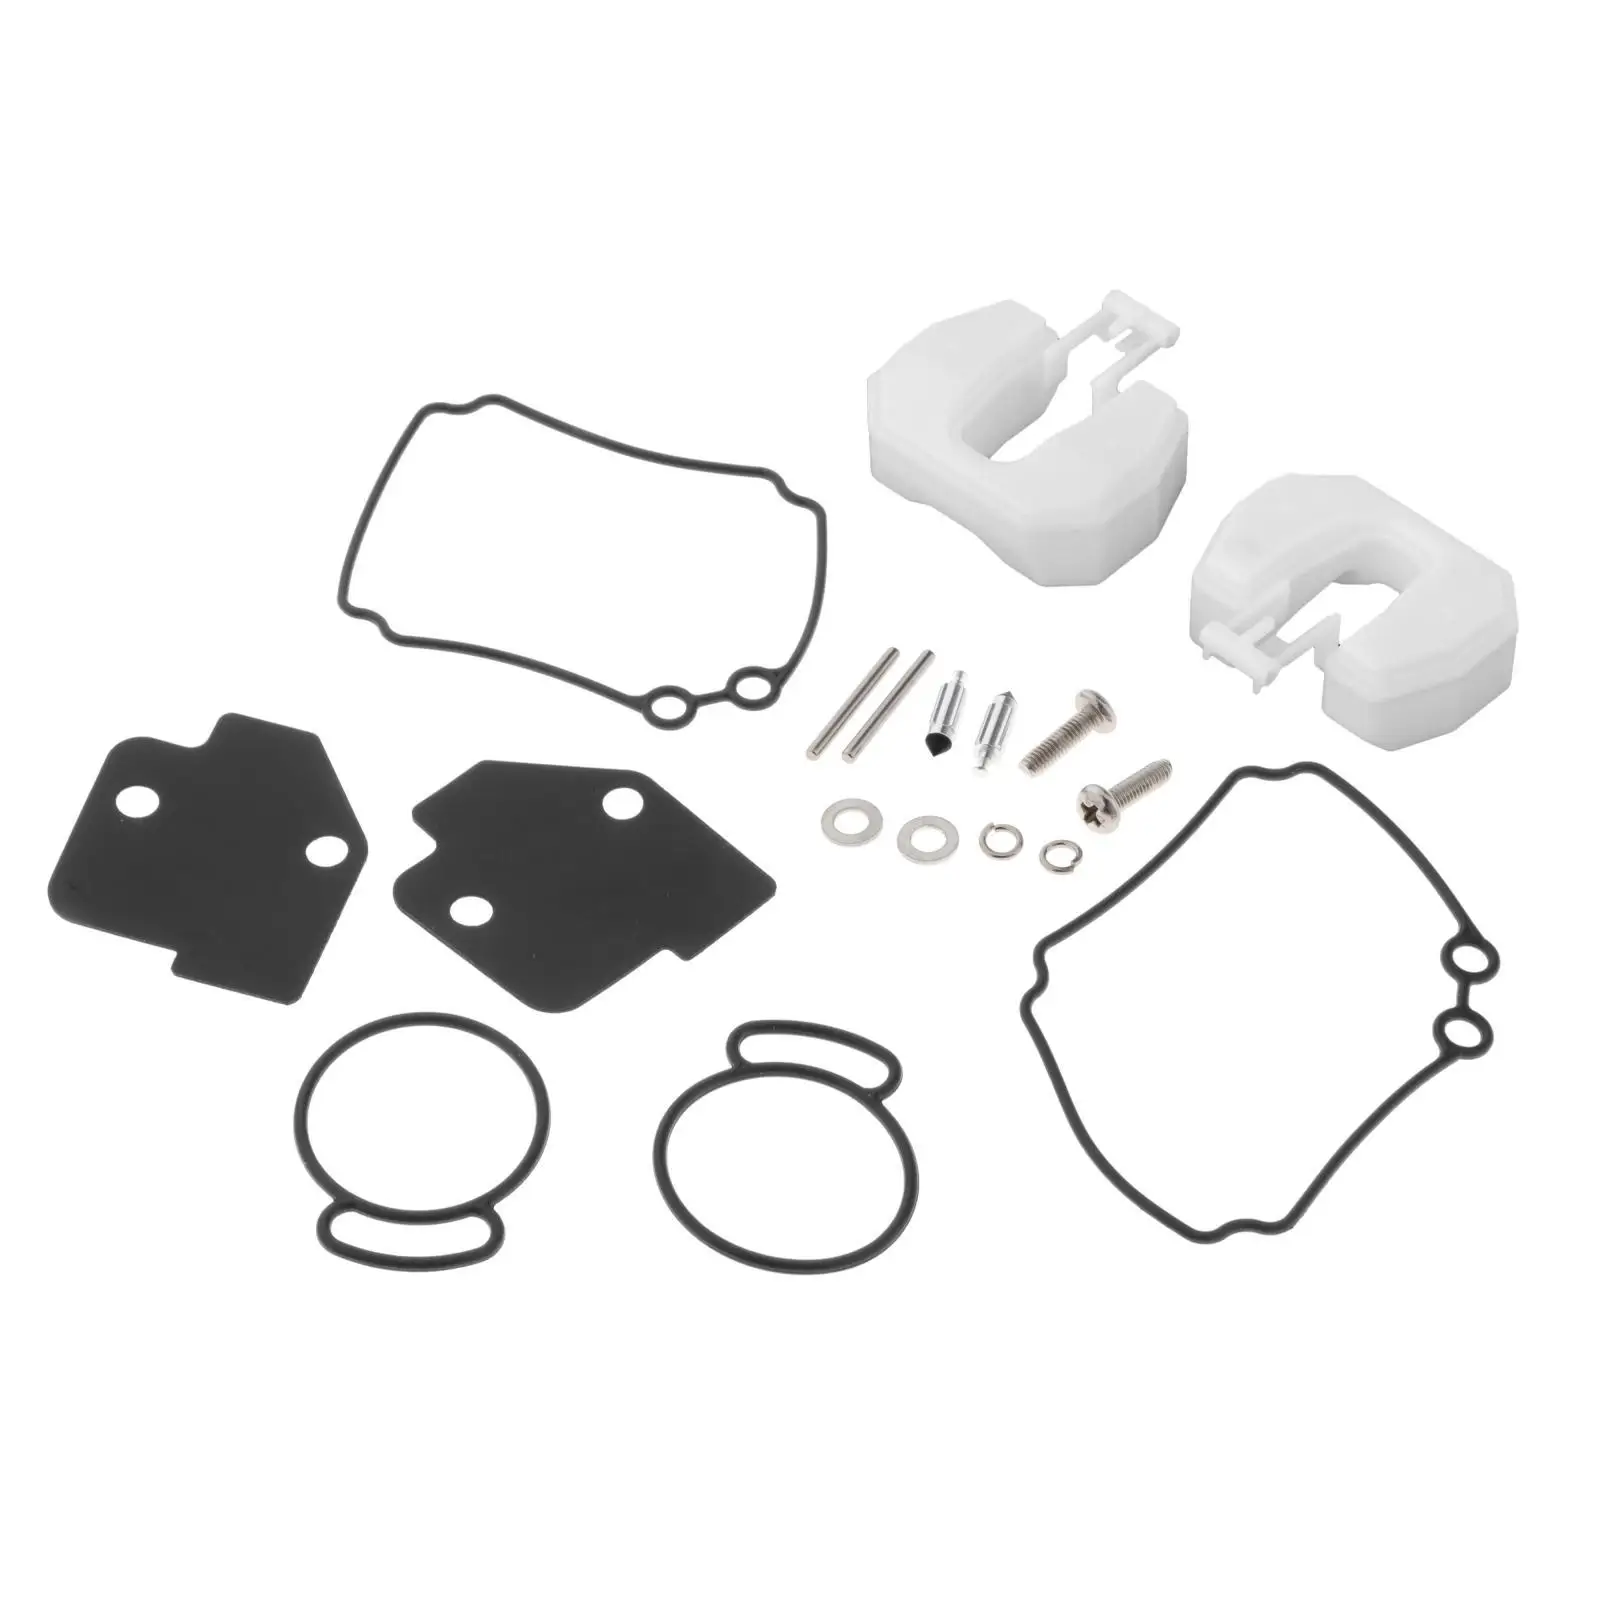 6L2-W0093-00-00 Carburetor Repair Kit Fit for Yamaha 2-Stroke Replacement High Reliability High Performance Accessory